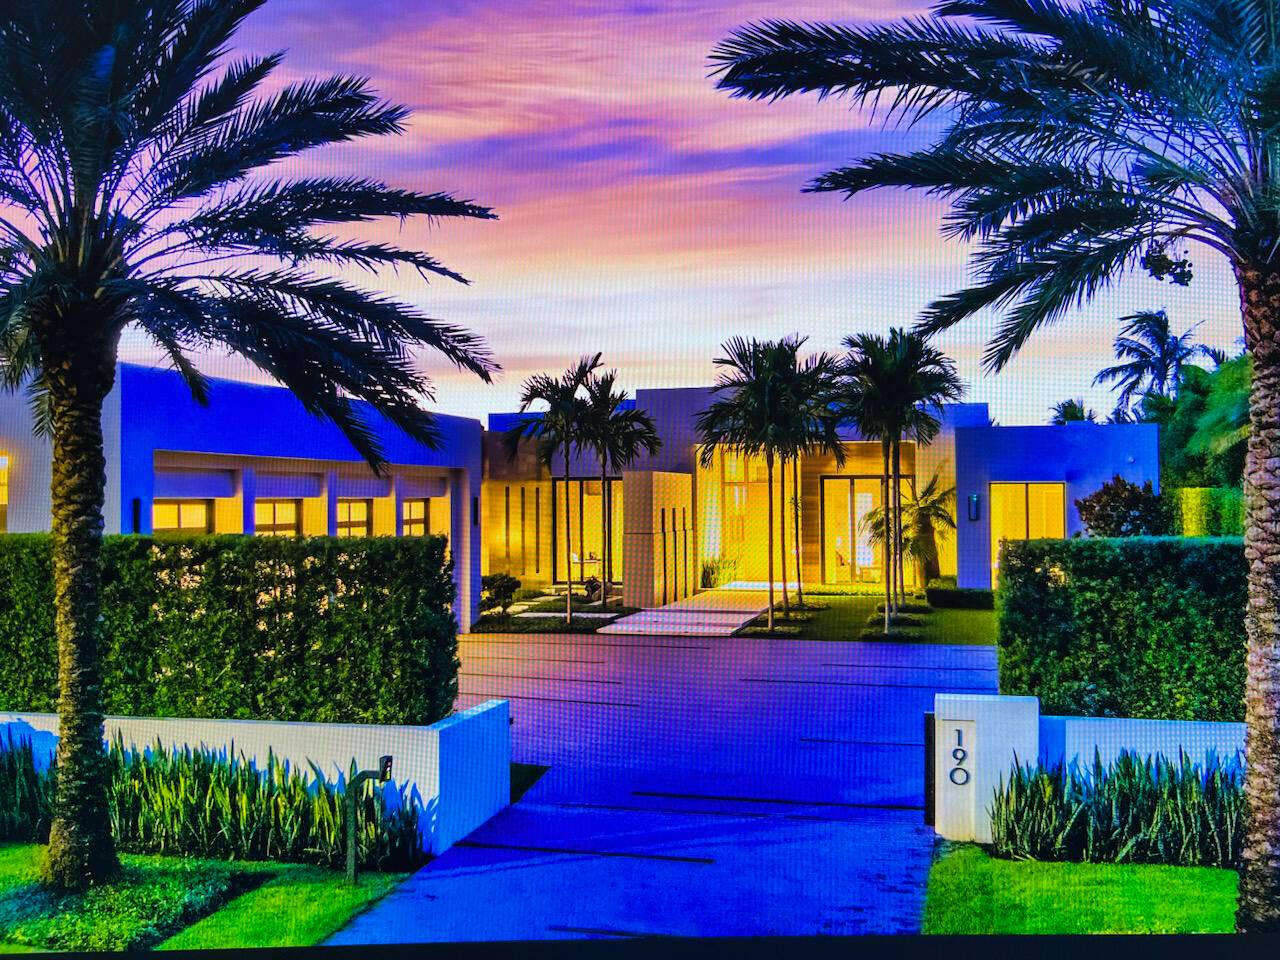 Gated High Styled Intracoastal Estate sited along fashionable Fifth Avenue Estates amongst Boca Raton's Mansion Row by prestigious JH Norman Homes and architect Brenner Architecture Group A1A.